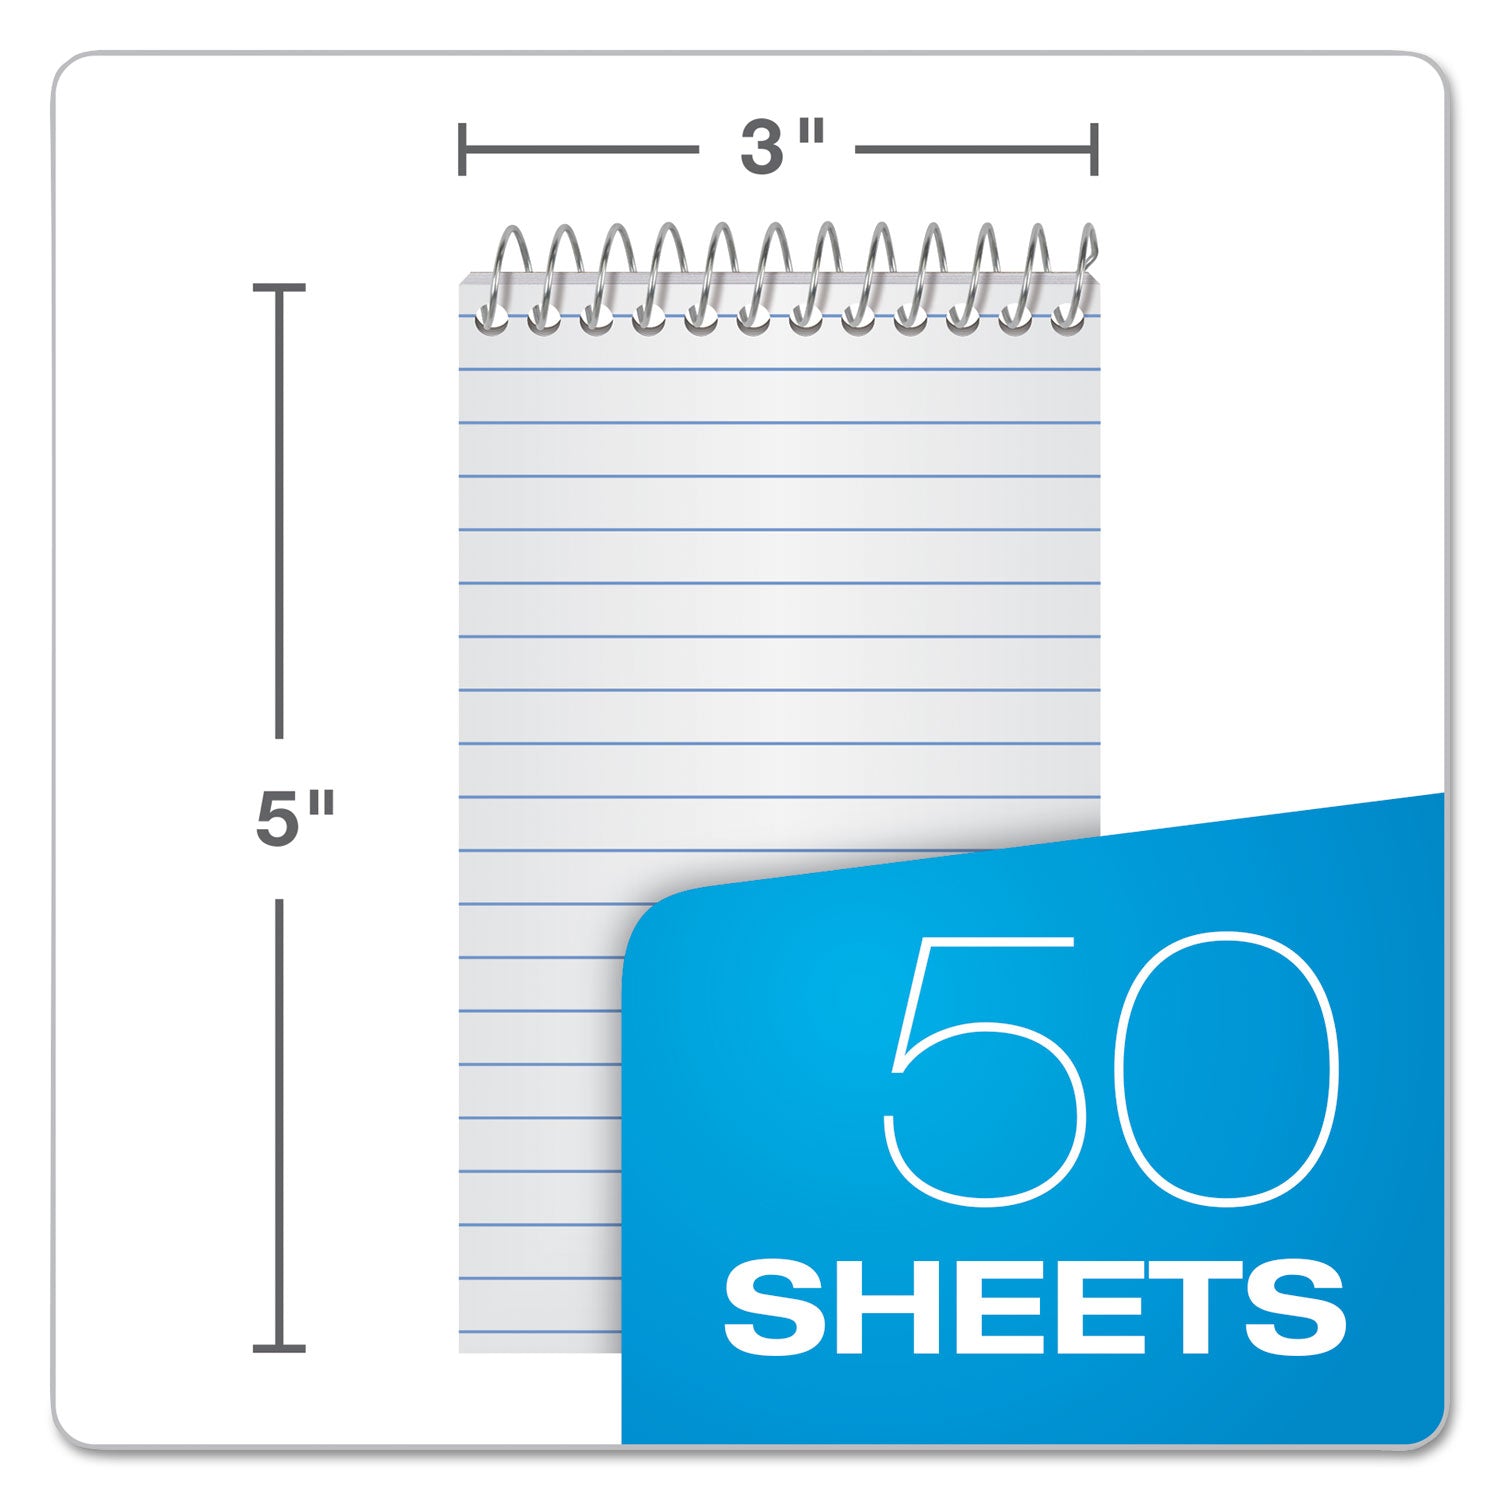 Memo Pads, Narrow Rule, Randomly Assorted Cover Colors, 50 White 3 x 5 Sheets - 